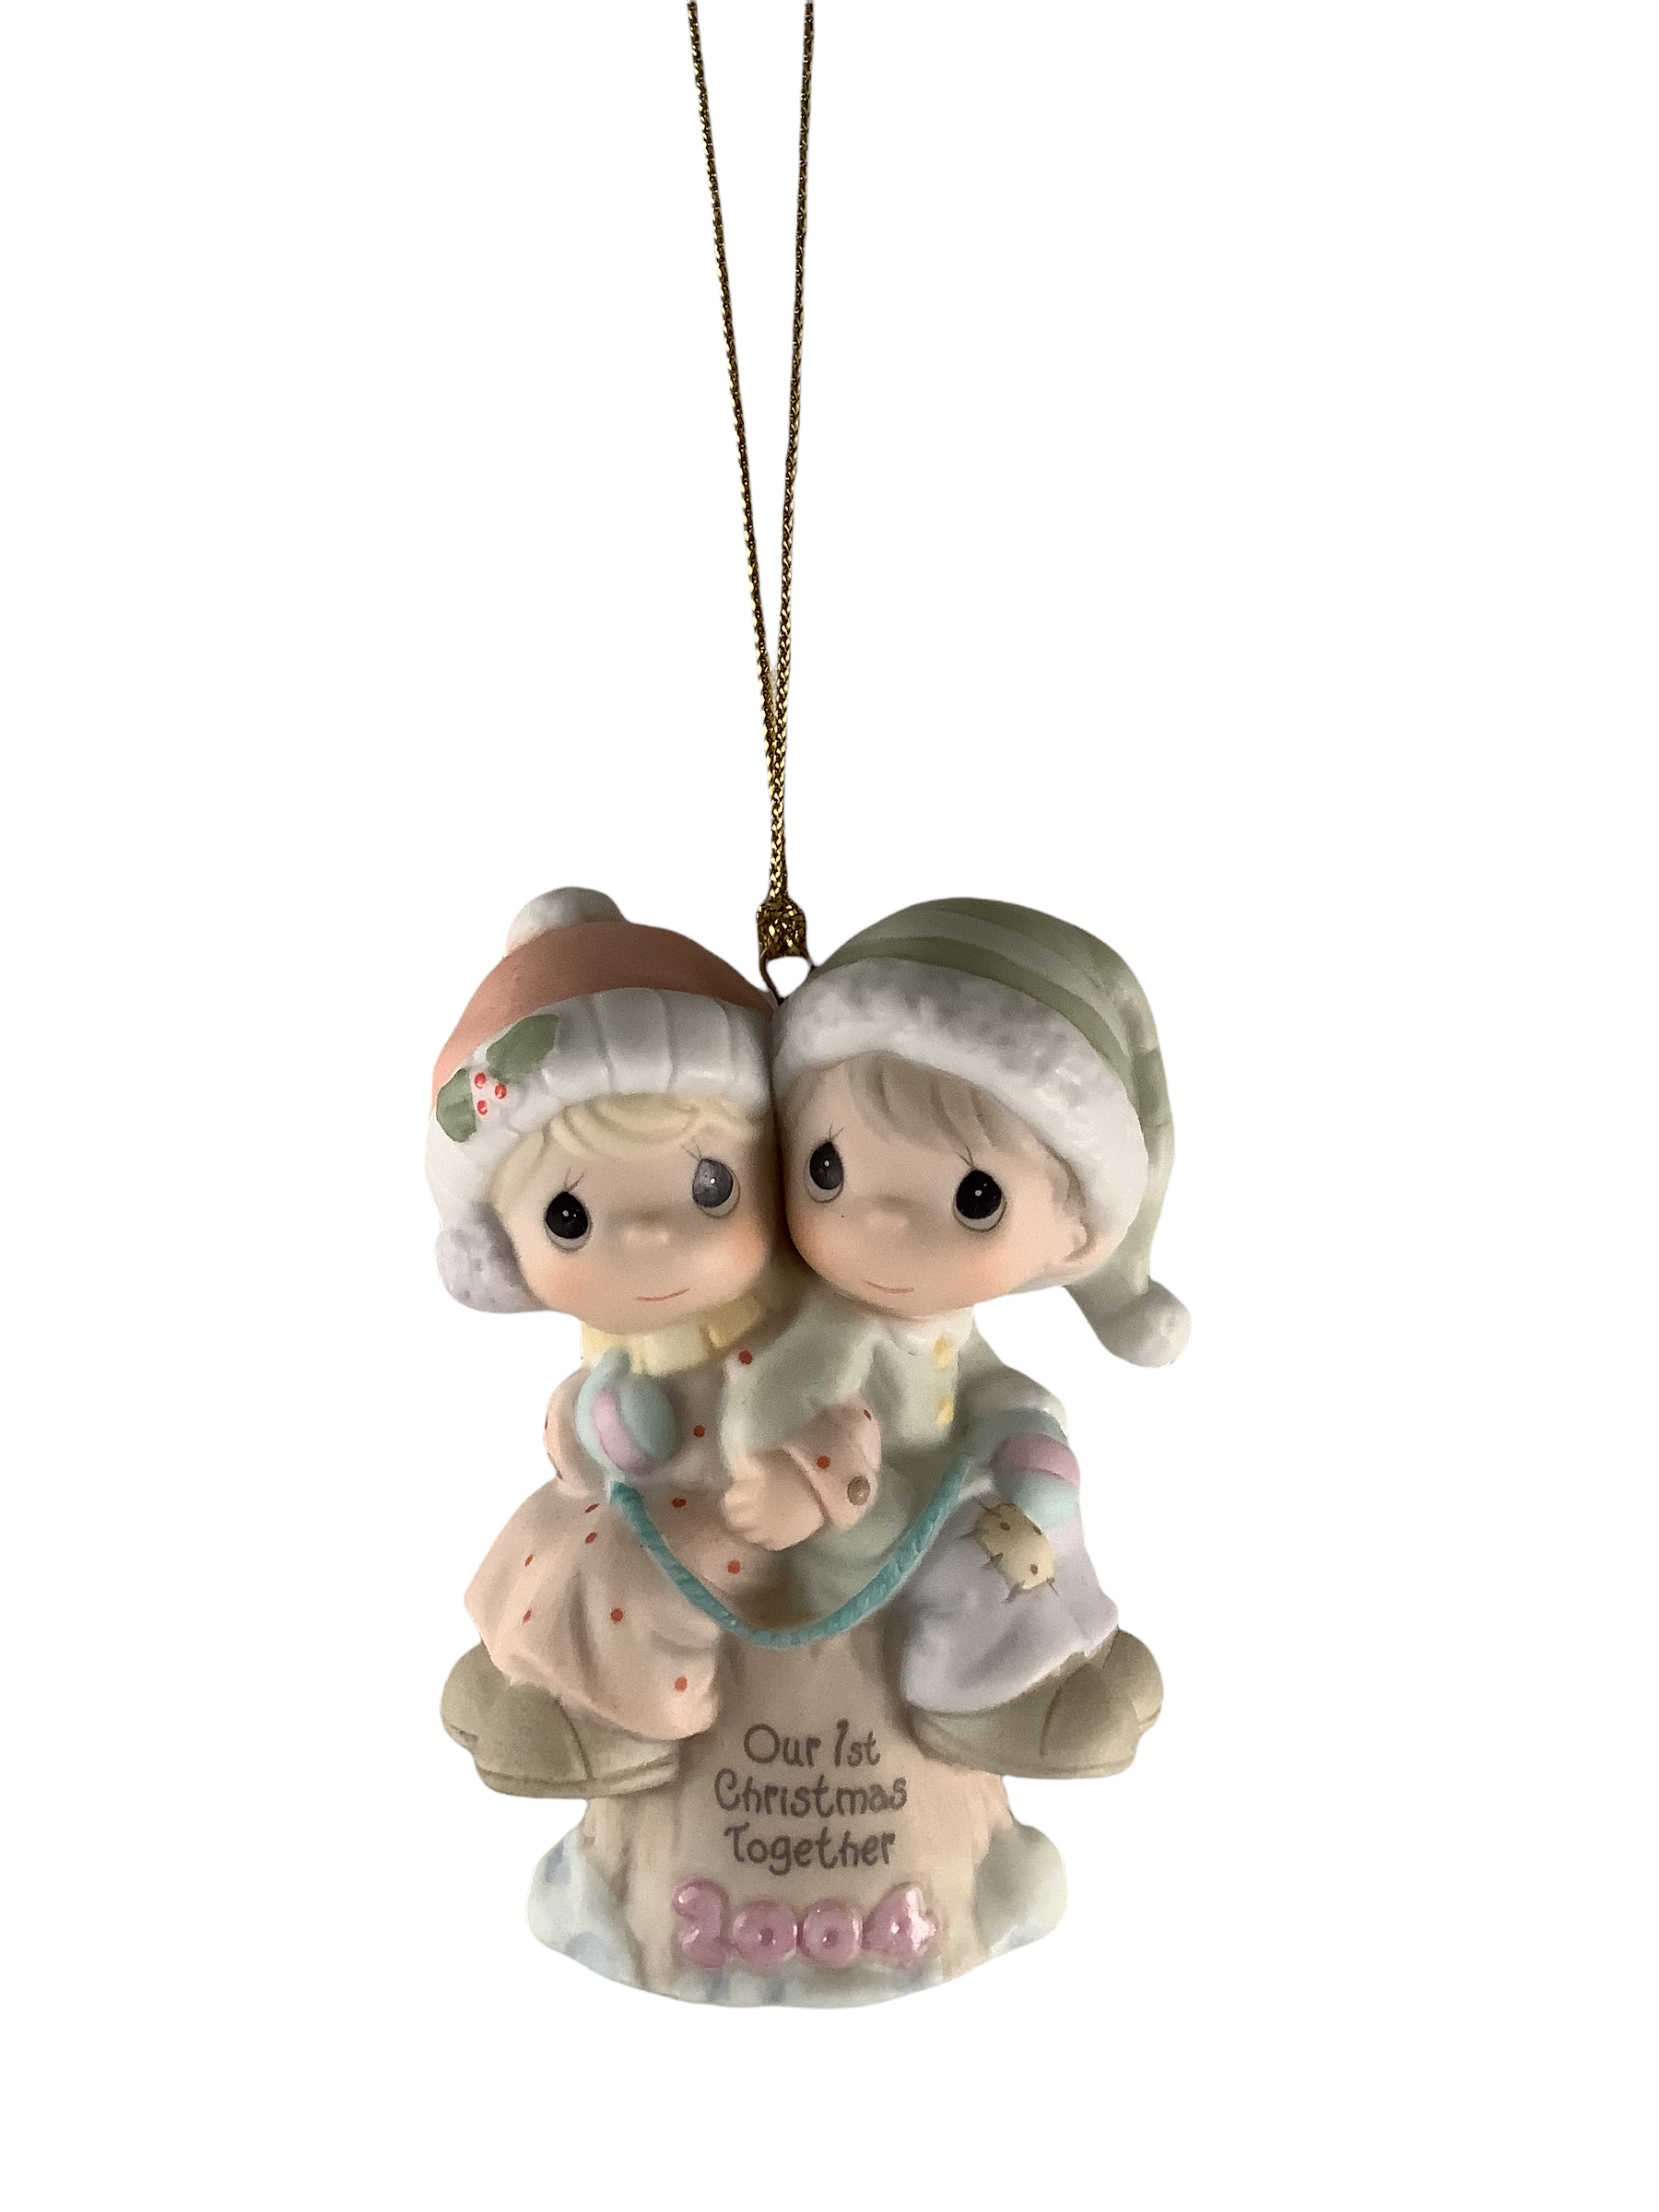 Our First Christmas Together 2004 - Precious Moment Ornament